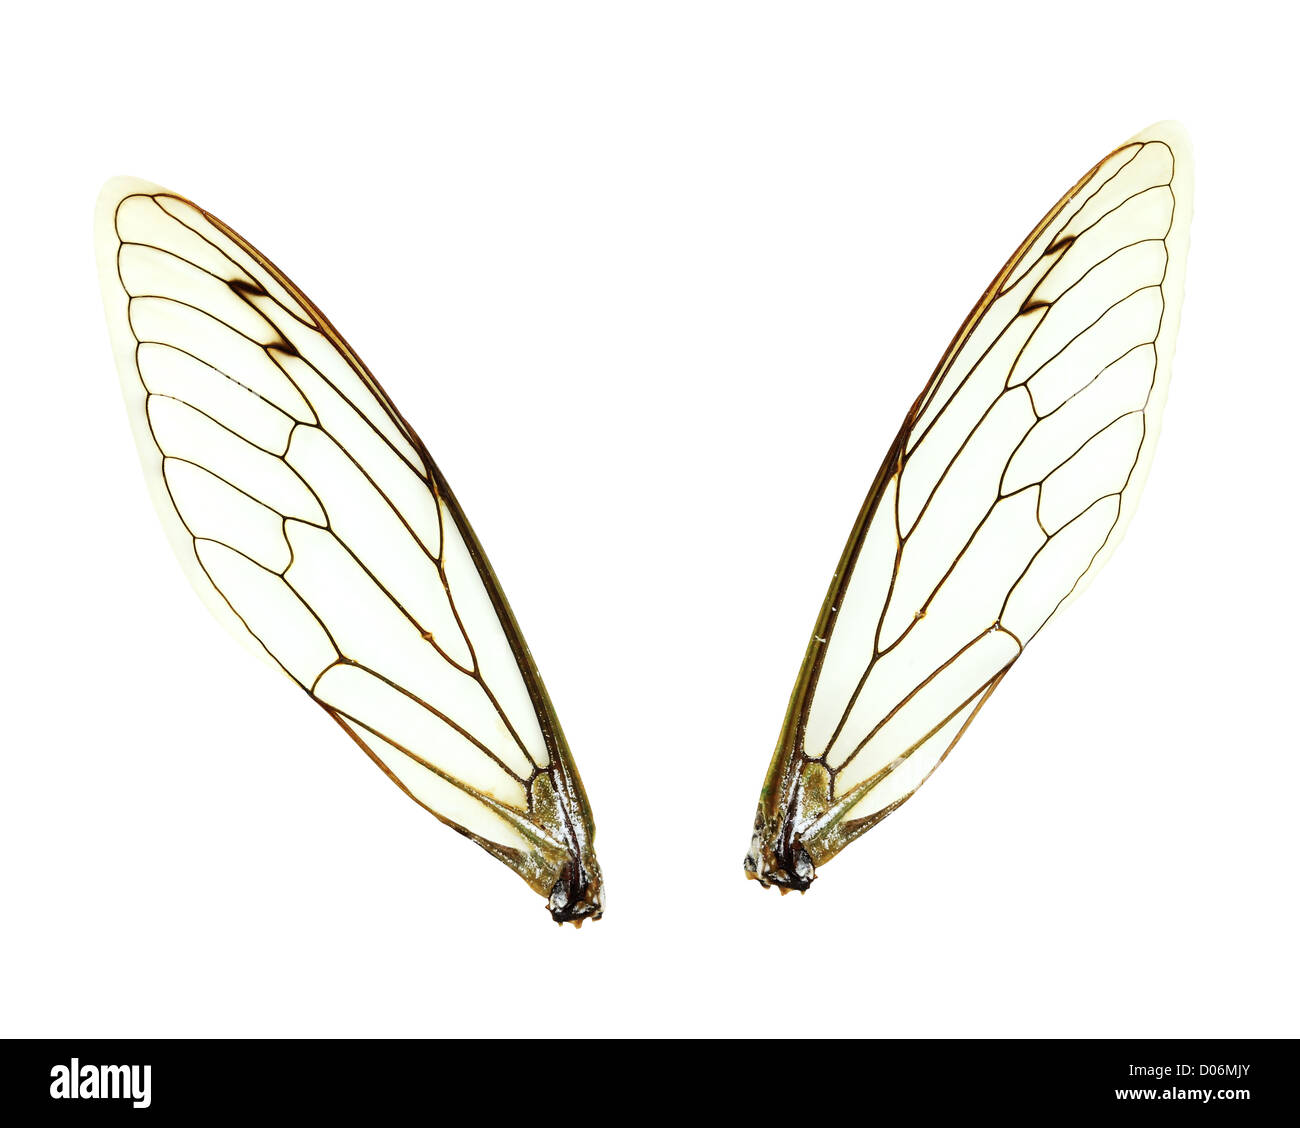 Two seperate Cicada (Jar FLy) wings isolated over a white background with clipping path included. Stock Photo